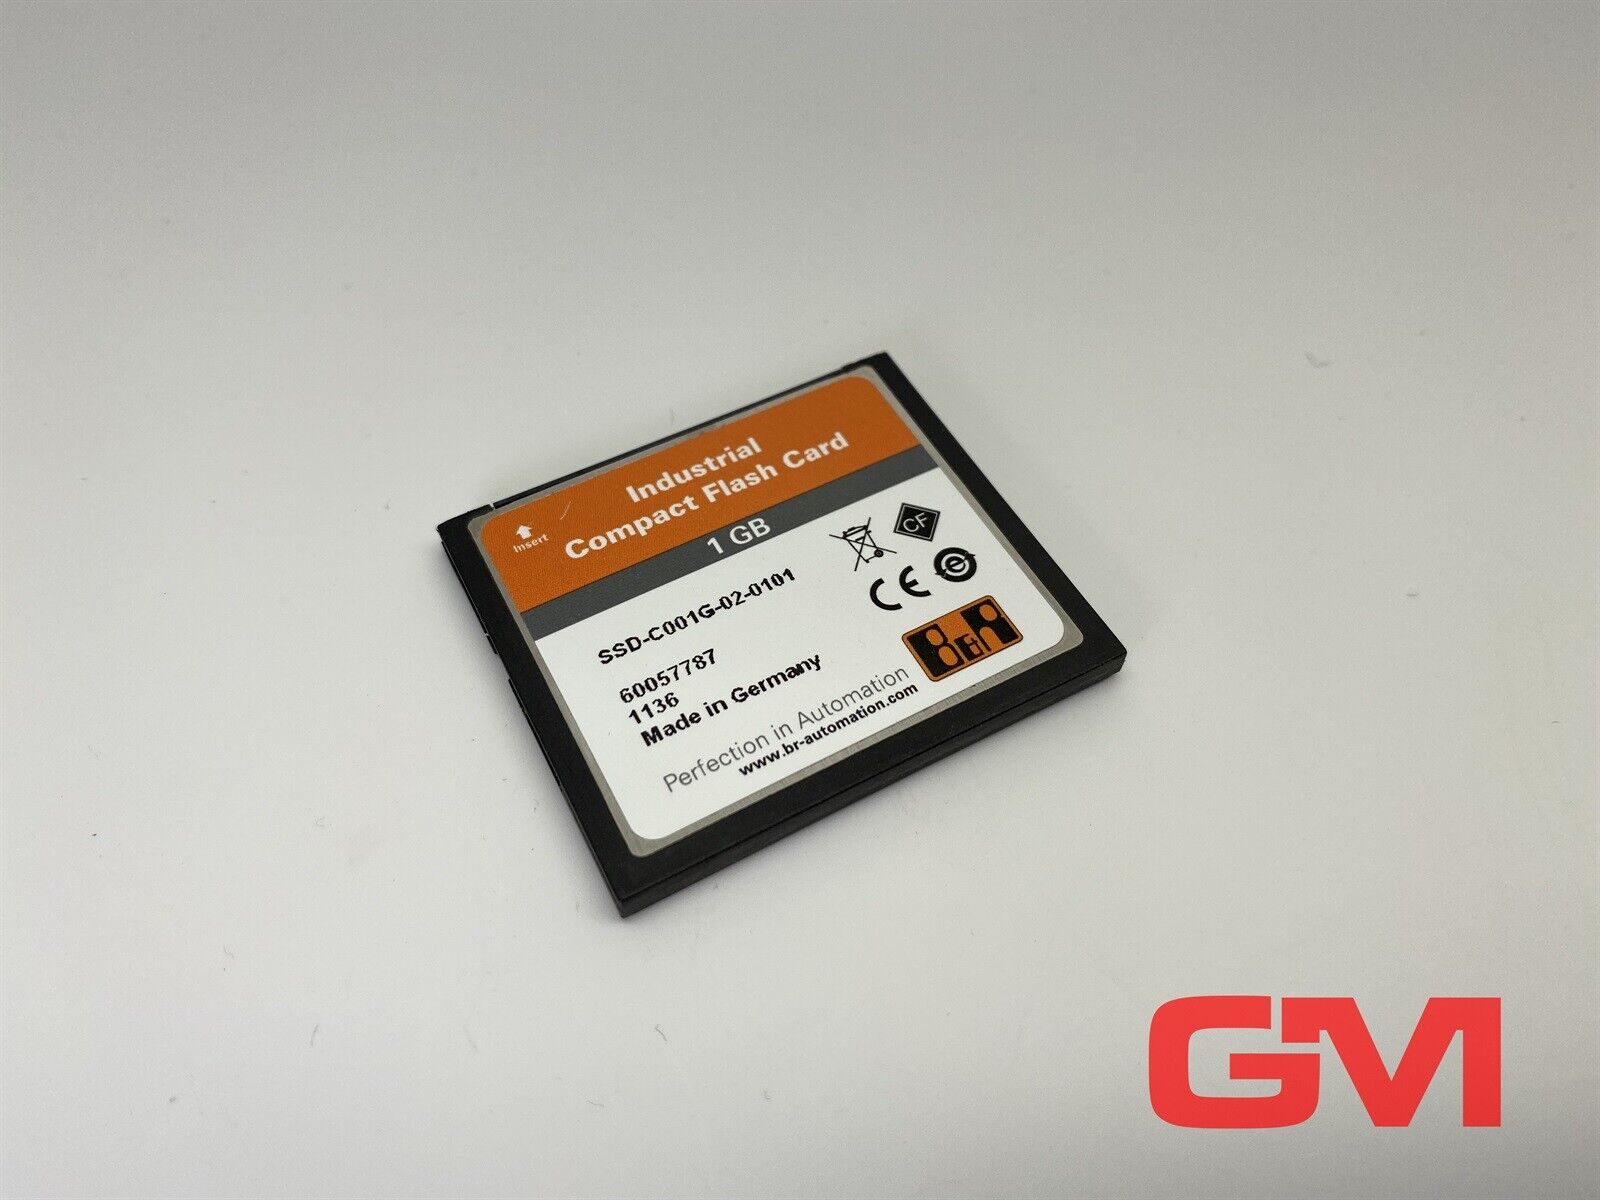 B&R Industrial Compact Flash Card 5CFCRD.1024-06 SSD-C001G-02-0101 Revision C0